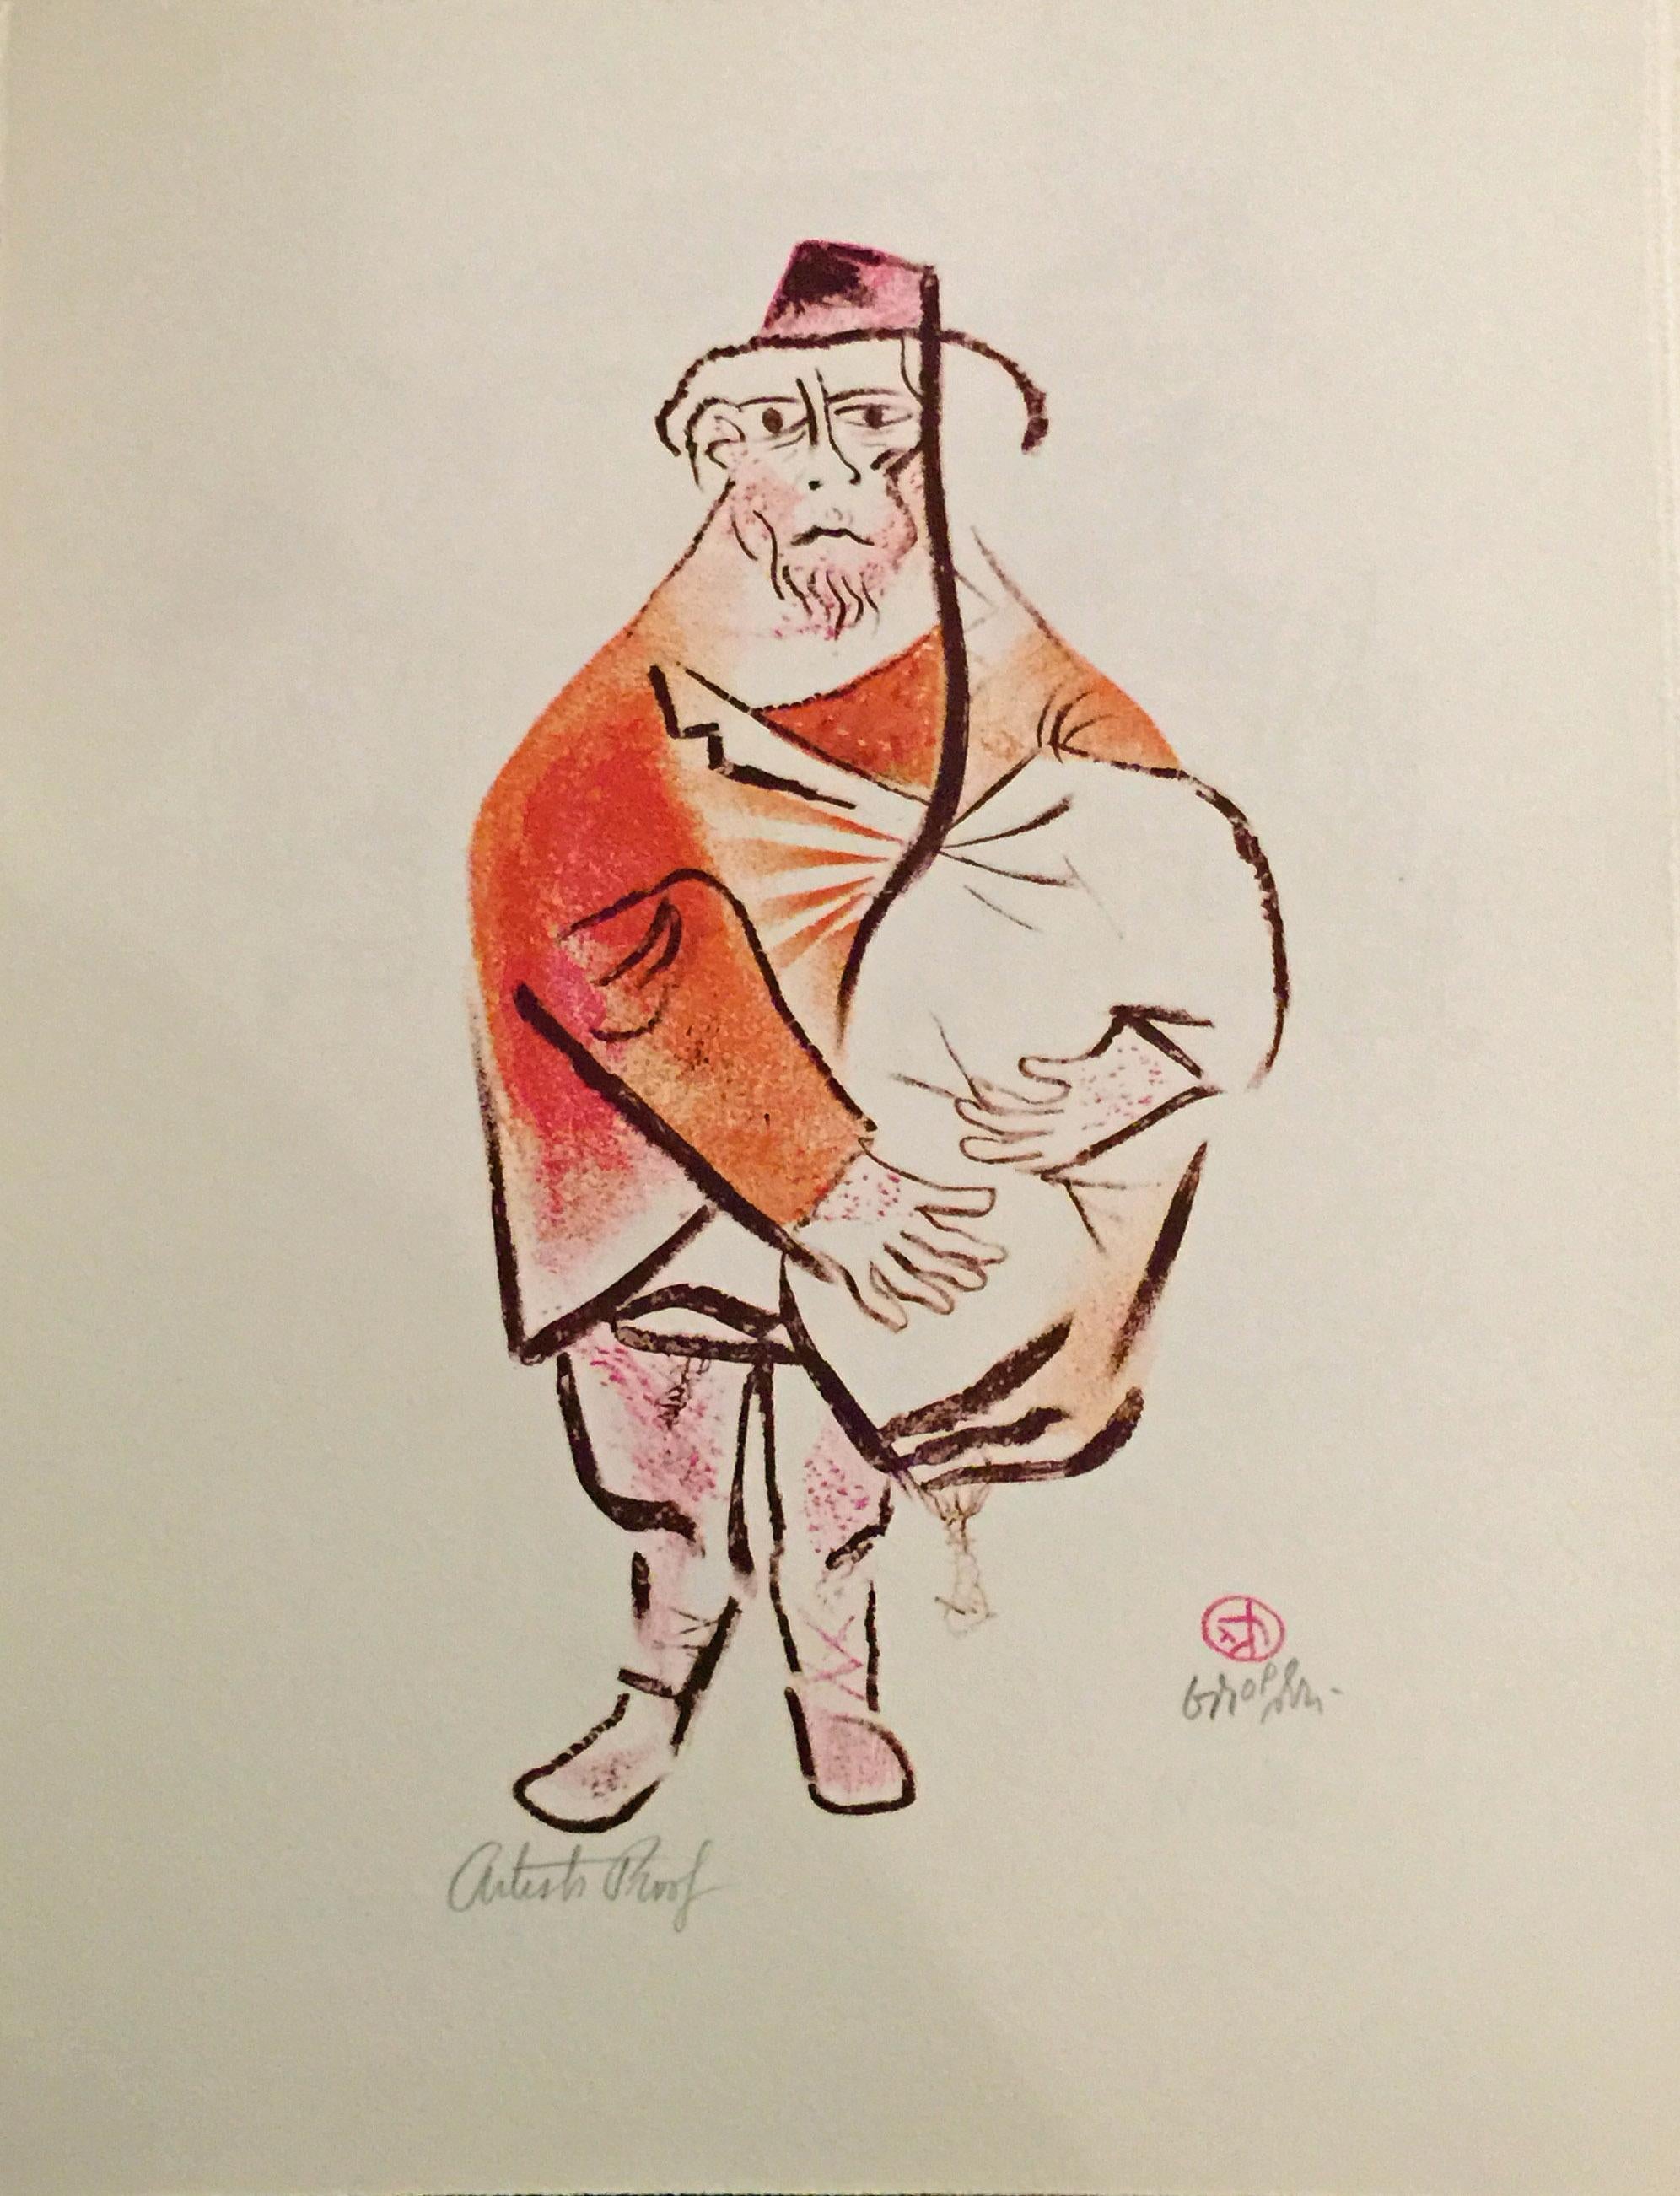 Gropper, William. THE SHTETL. Suite of 24 color lithographs, 1970. Portfolio with title page, justification page and 24 color lithographs each signed in pencil and inscribed 